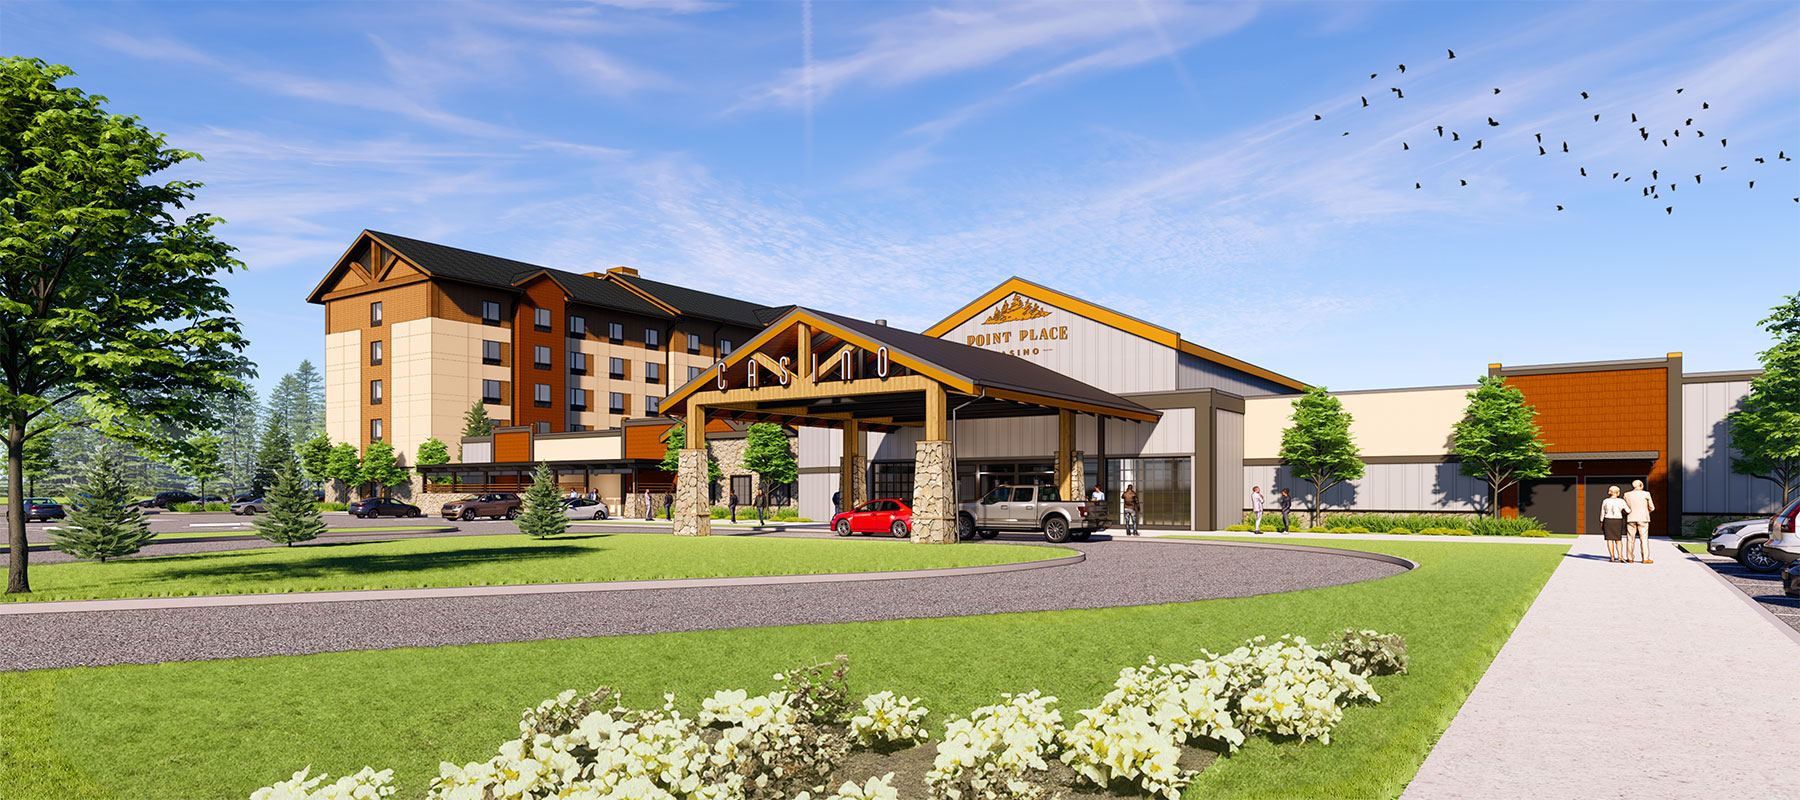 Point Place Casino Expansion